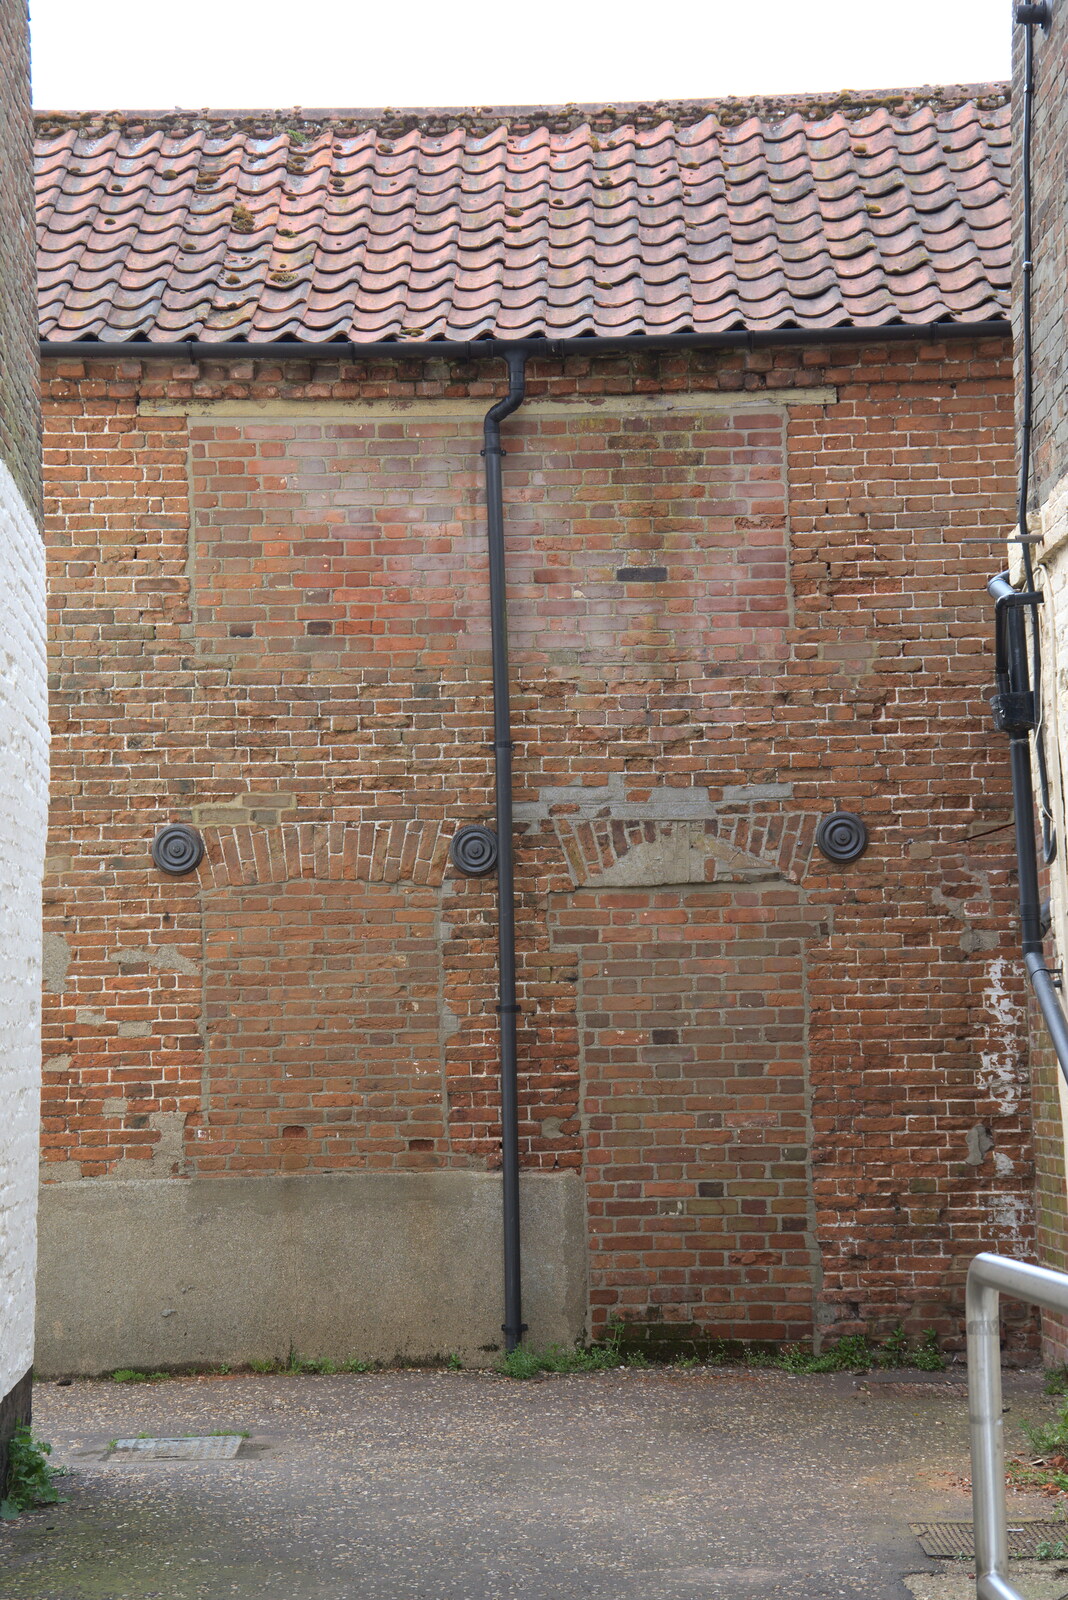 The ghost of a building, bricked up from A Vaccination Afternoon, Swaffham, Norfolk - 9th May 2021